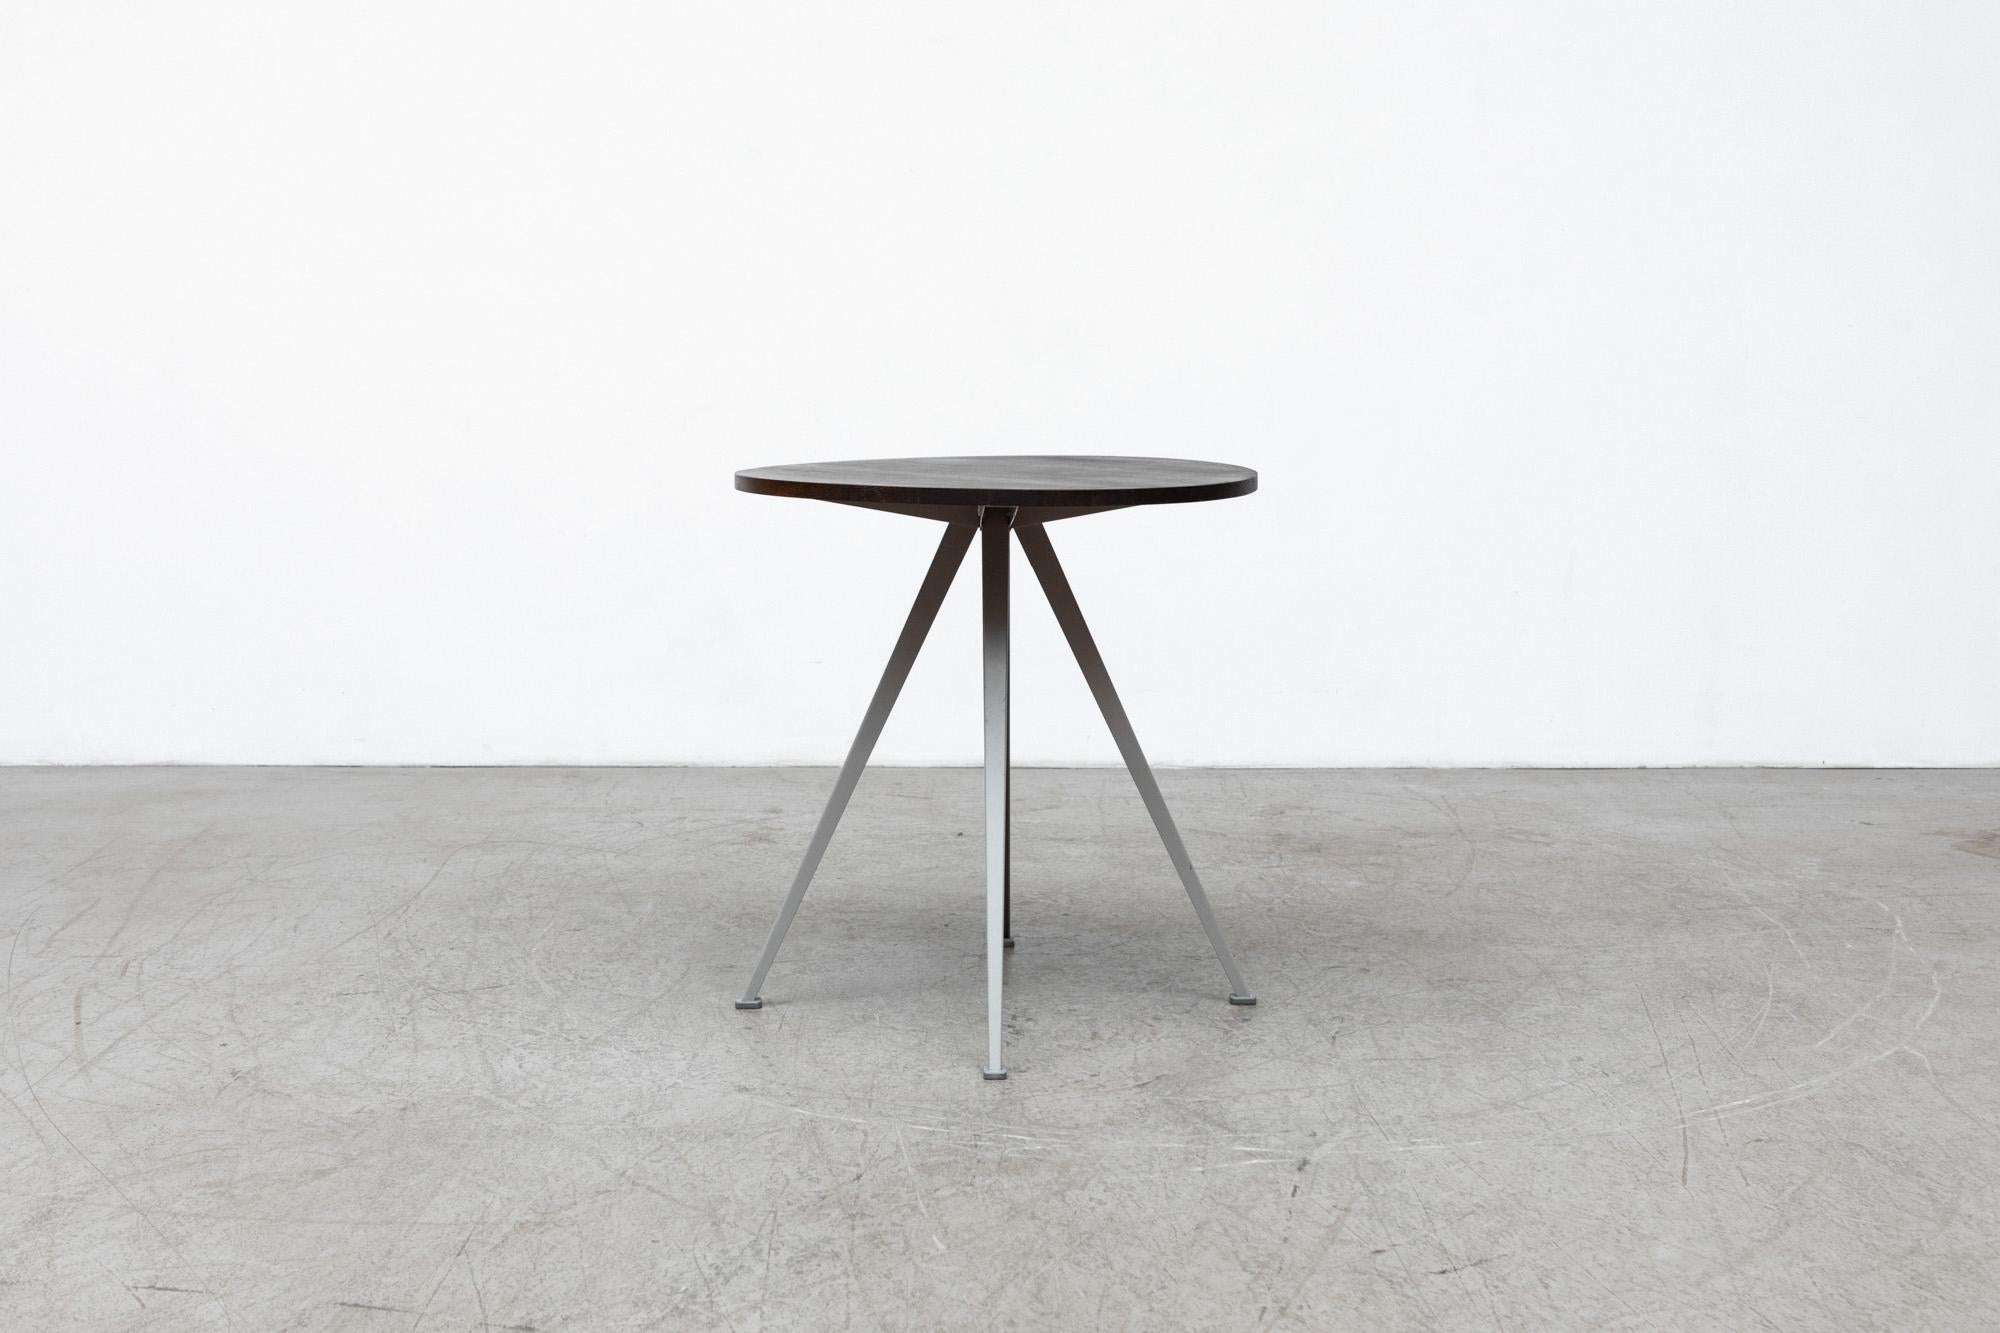 Enameled Wim Rietveld Small Round Pyramid Table in Smoked Oak w/ Gray Legs by Hay